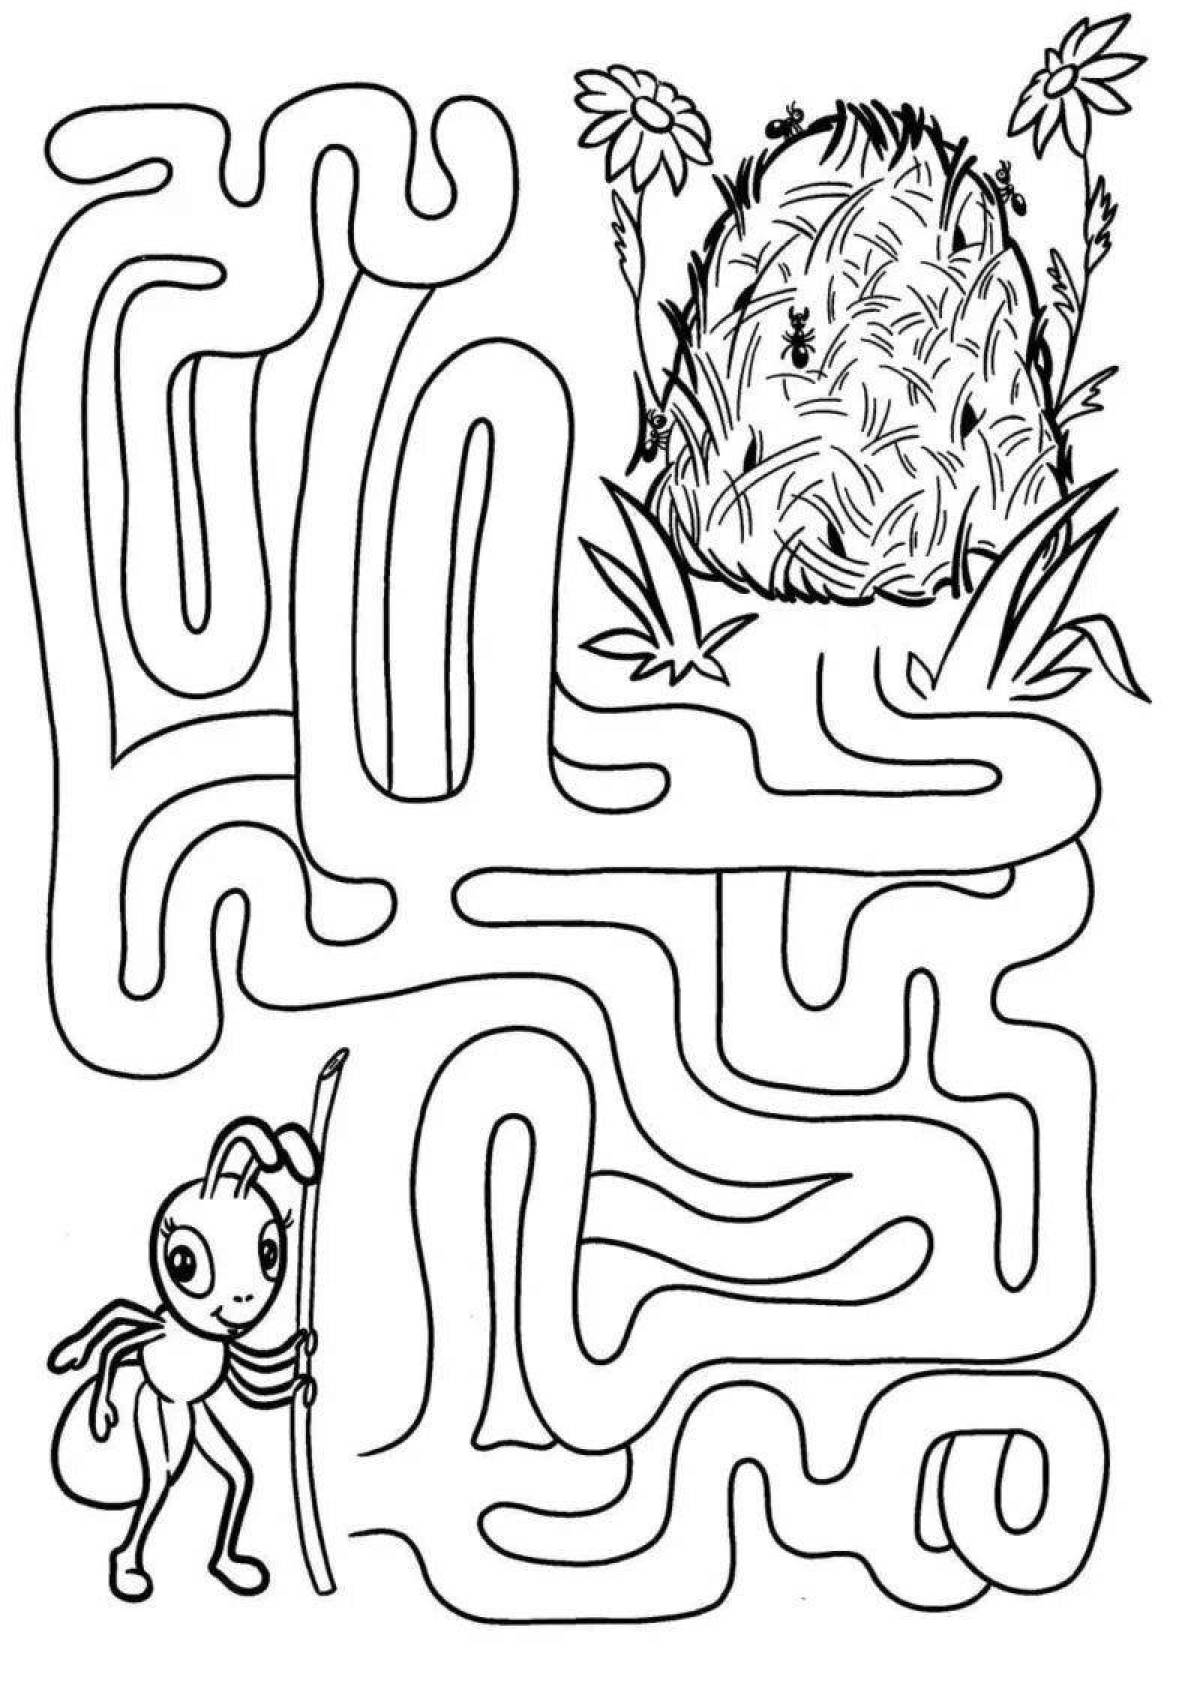 Adorable maze coloring book for children 5-6 years old